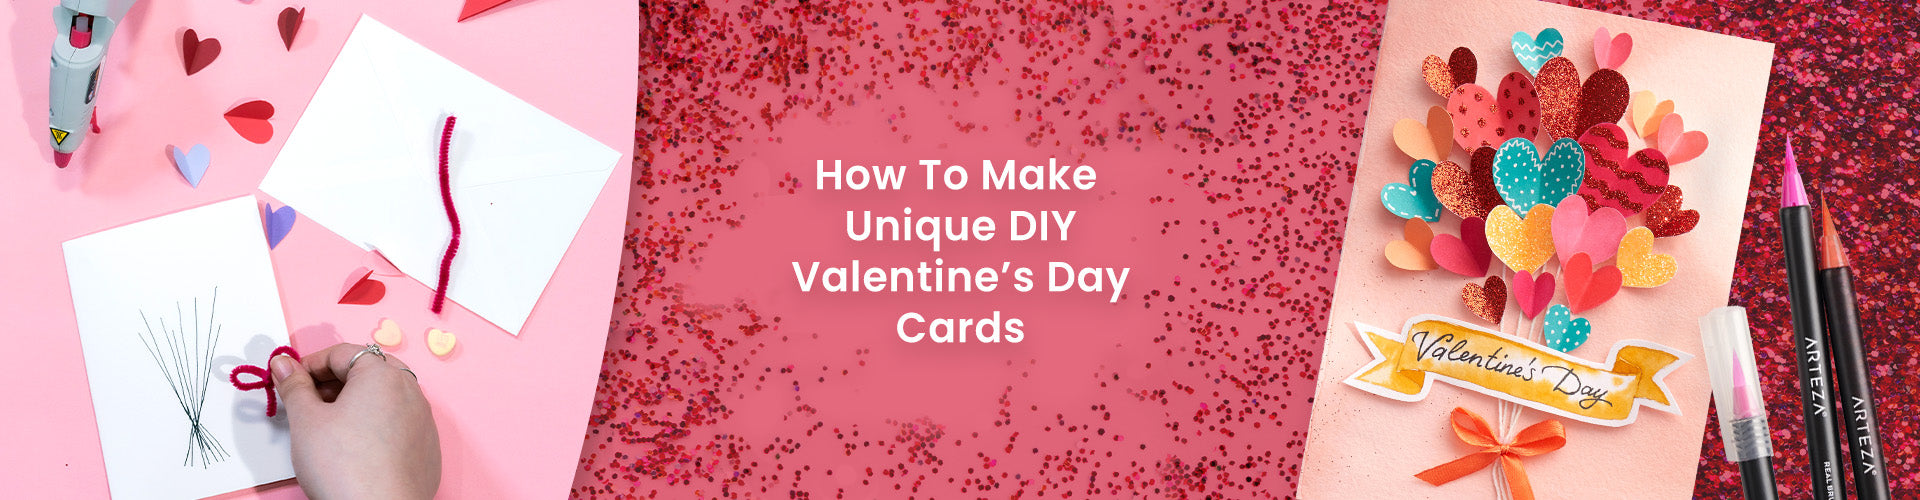 How To Make Unique DIY Valentine’s Day Cards